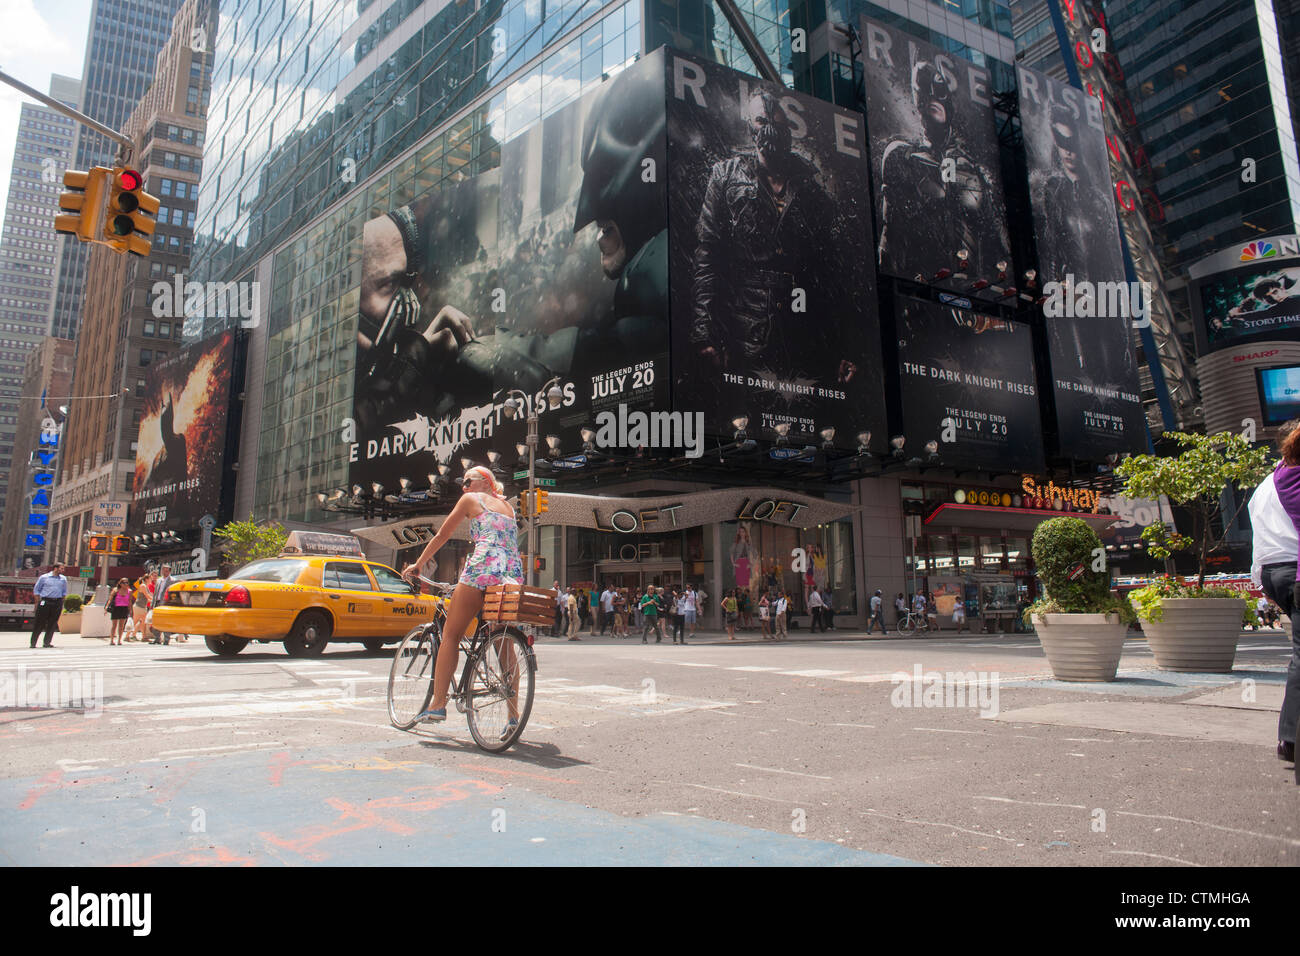 Advertising for the latest Batman film, 'The Dark Knight Rises' is seen in Times Square Stock Photo